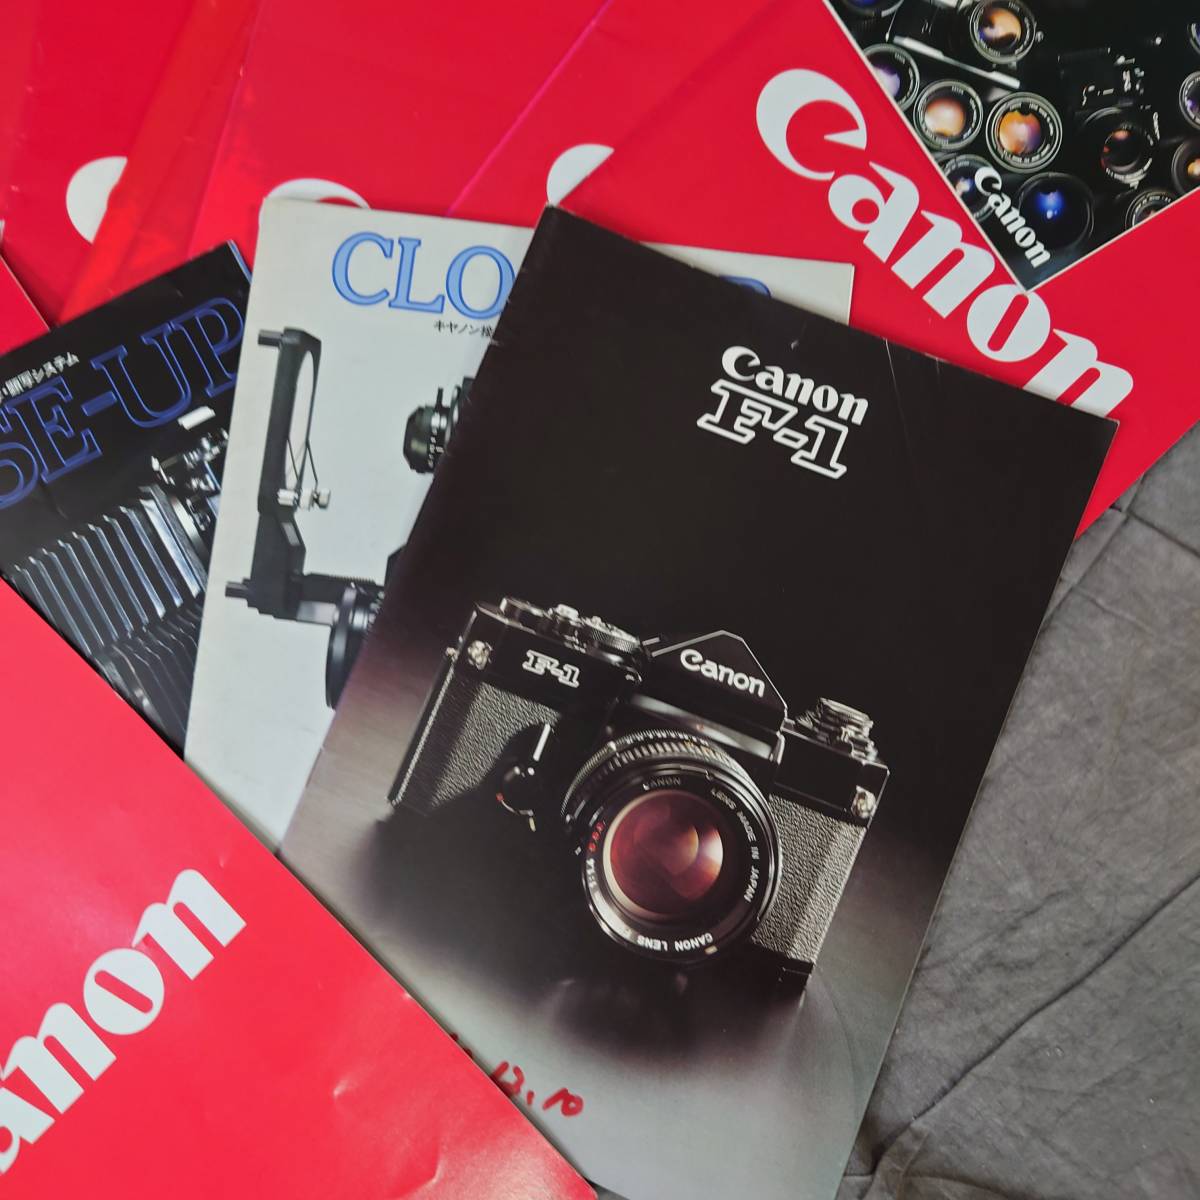  that time thing CANON catalog summarize film camera New F-1 FD lens Canon present condition goods 